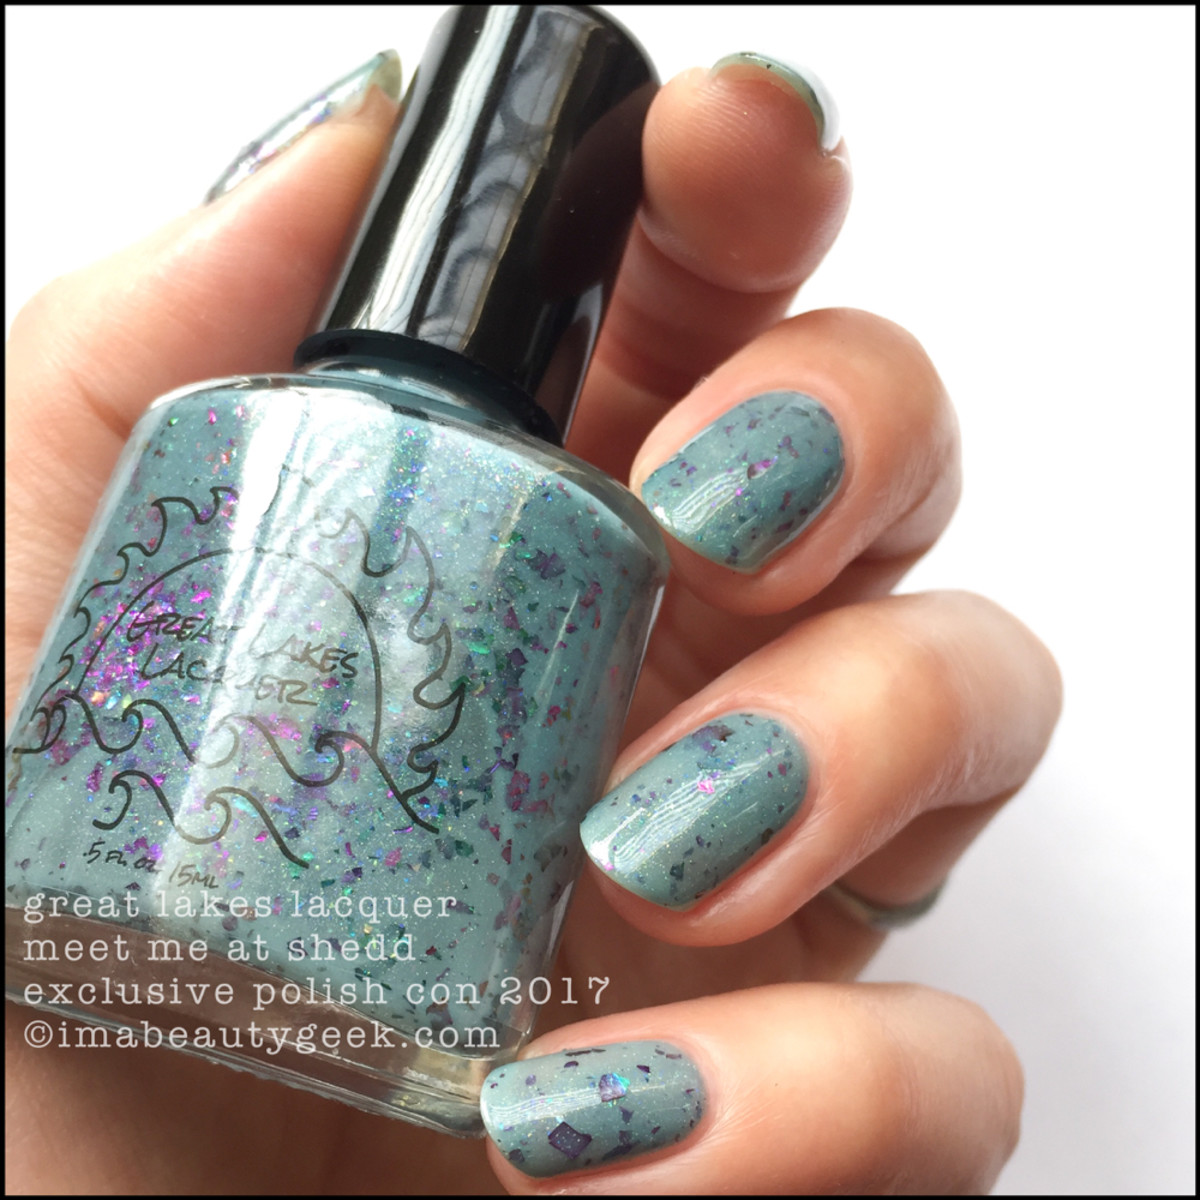 Great Lakes Lacquer Meet Me at Shedd _ Great Lakes Lacquer Polish Con 2017 Limited Editions